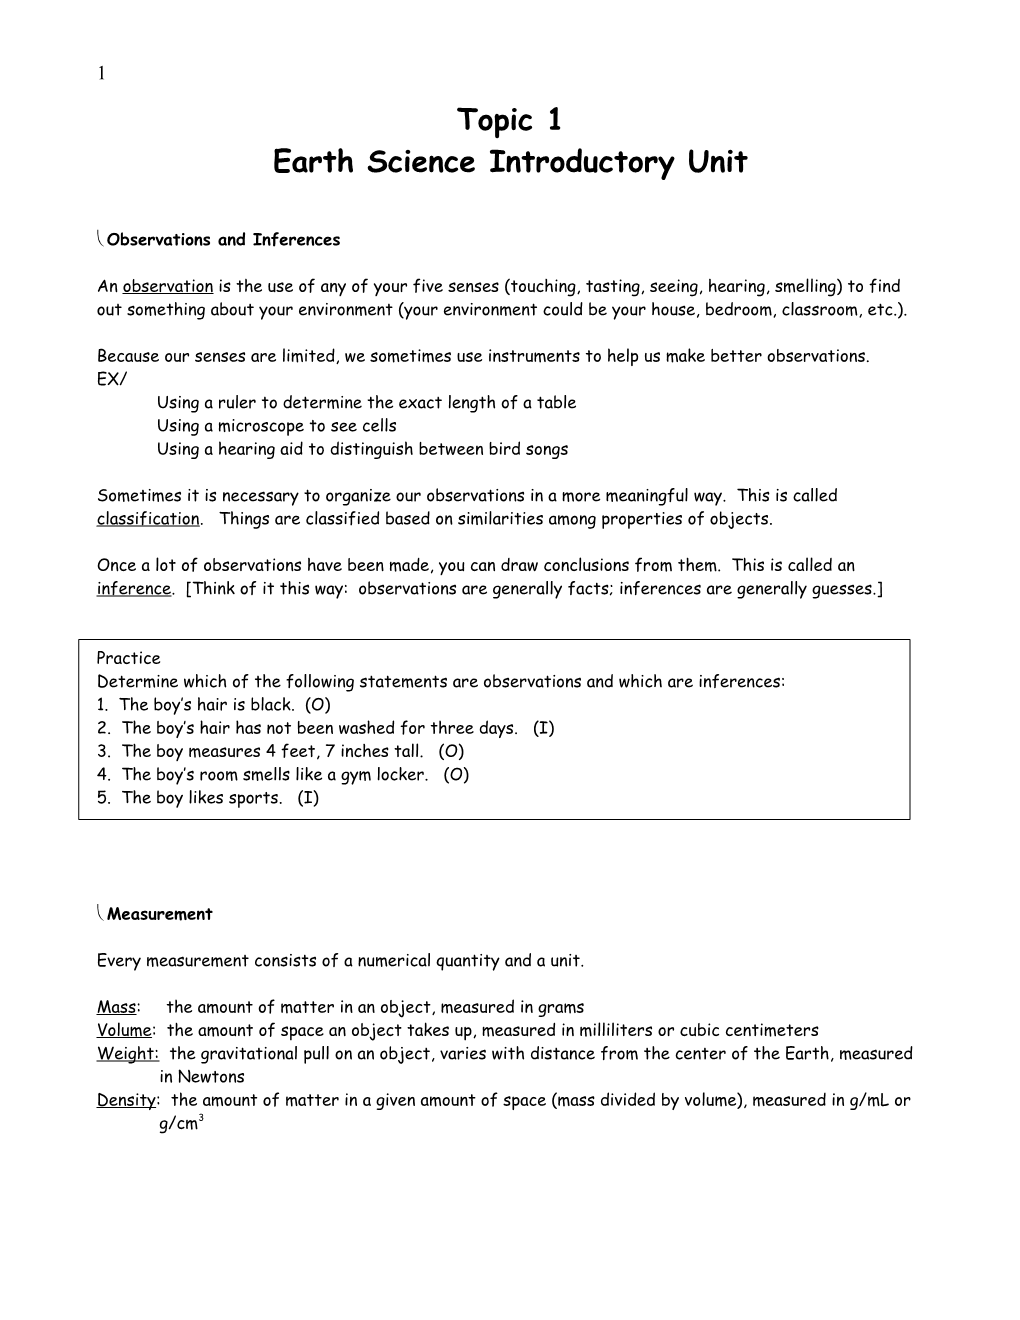 Earth Science Introductory Unit